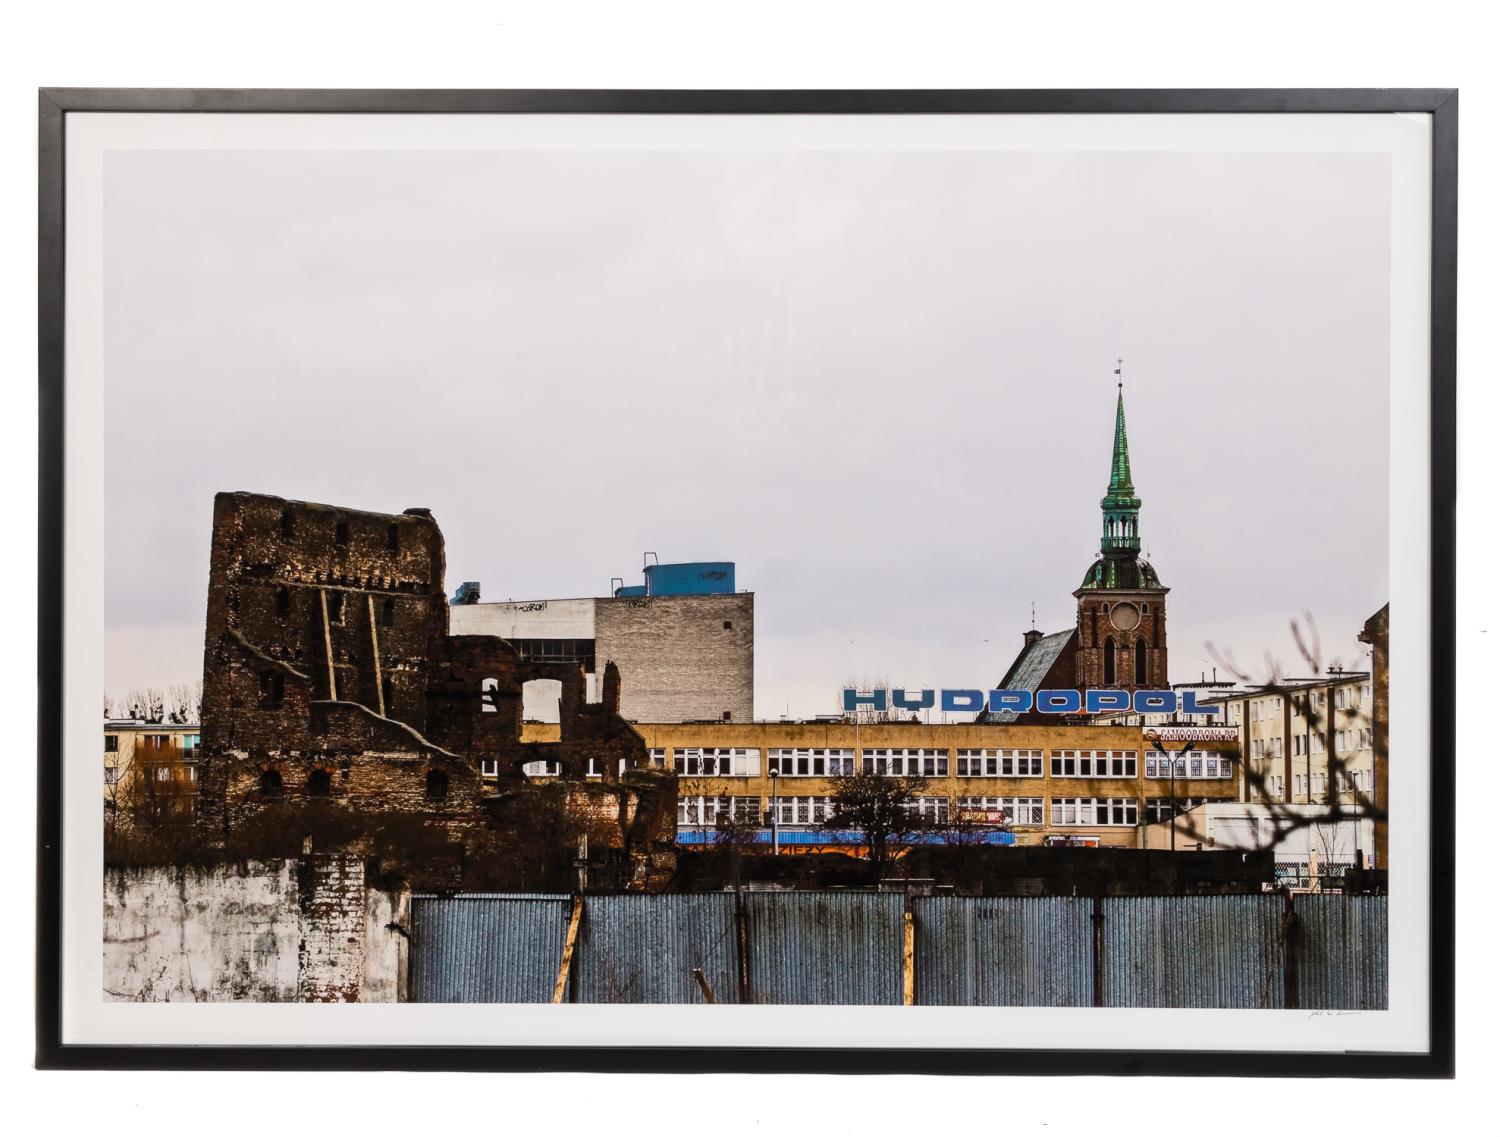 LARGE FORMAT PHOTOGRAPH CITY VIEW 29f642